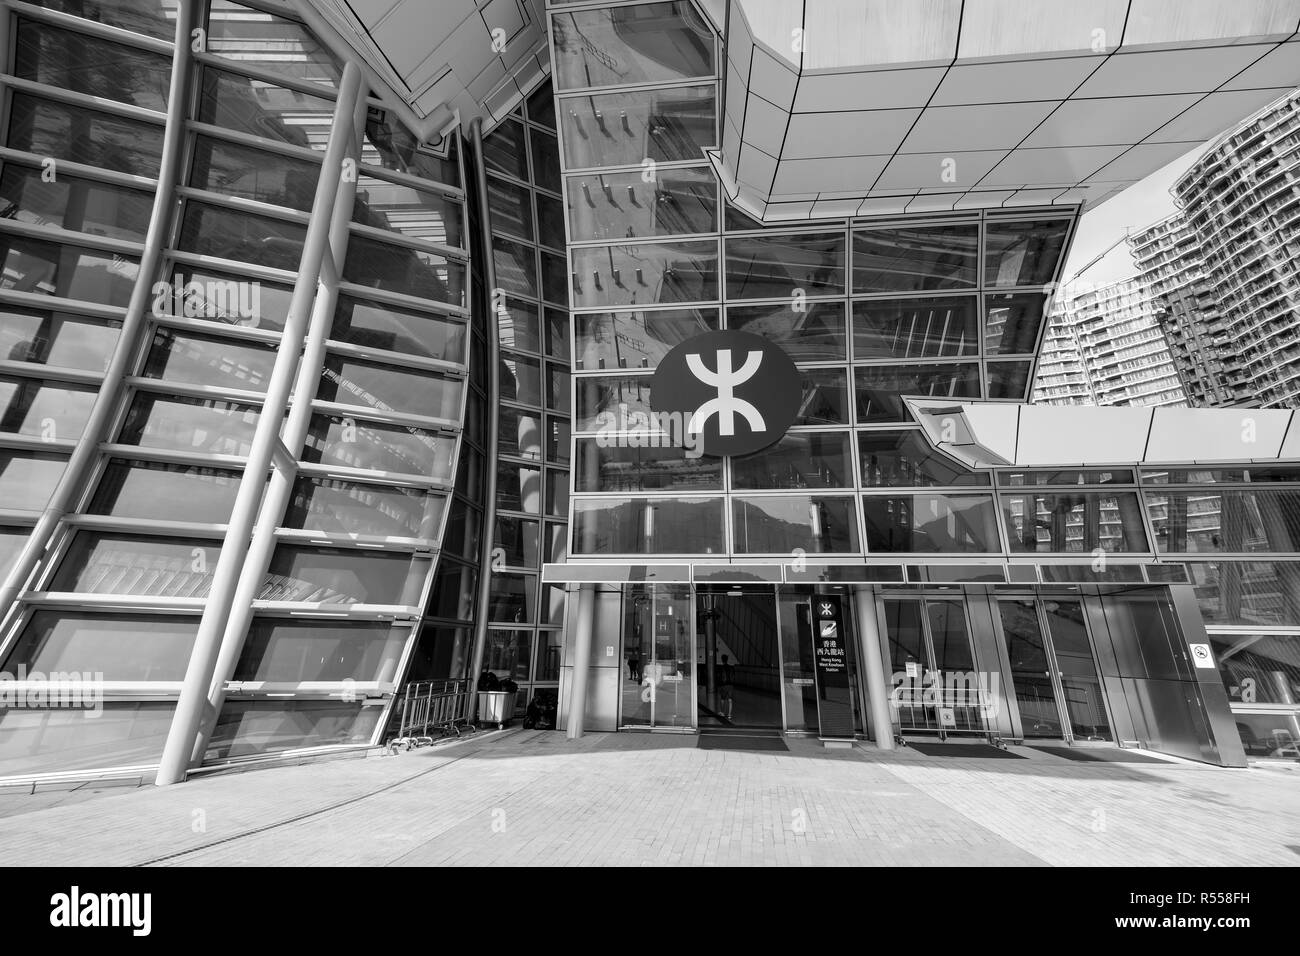 West Kowloon, Hong Kong - November 19, 2018: Main entrance of West Kowloon High Speed Rail Station in Hong Kong operated by MTR. Stock Photo